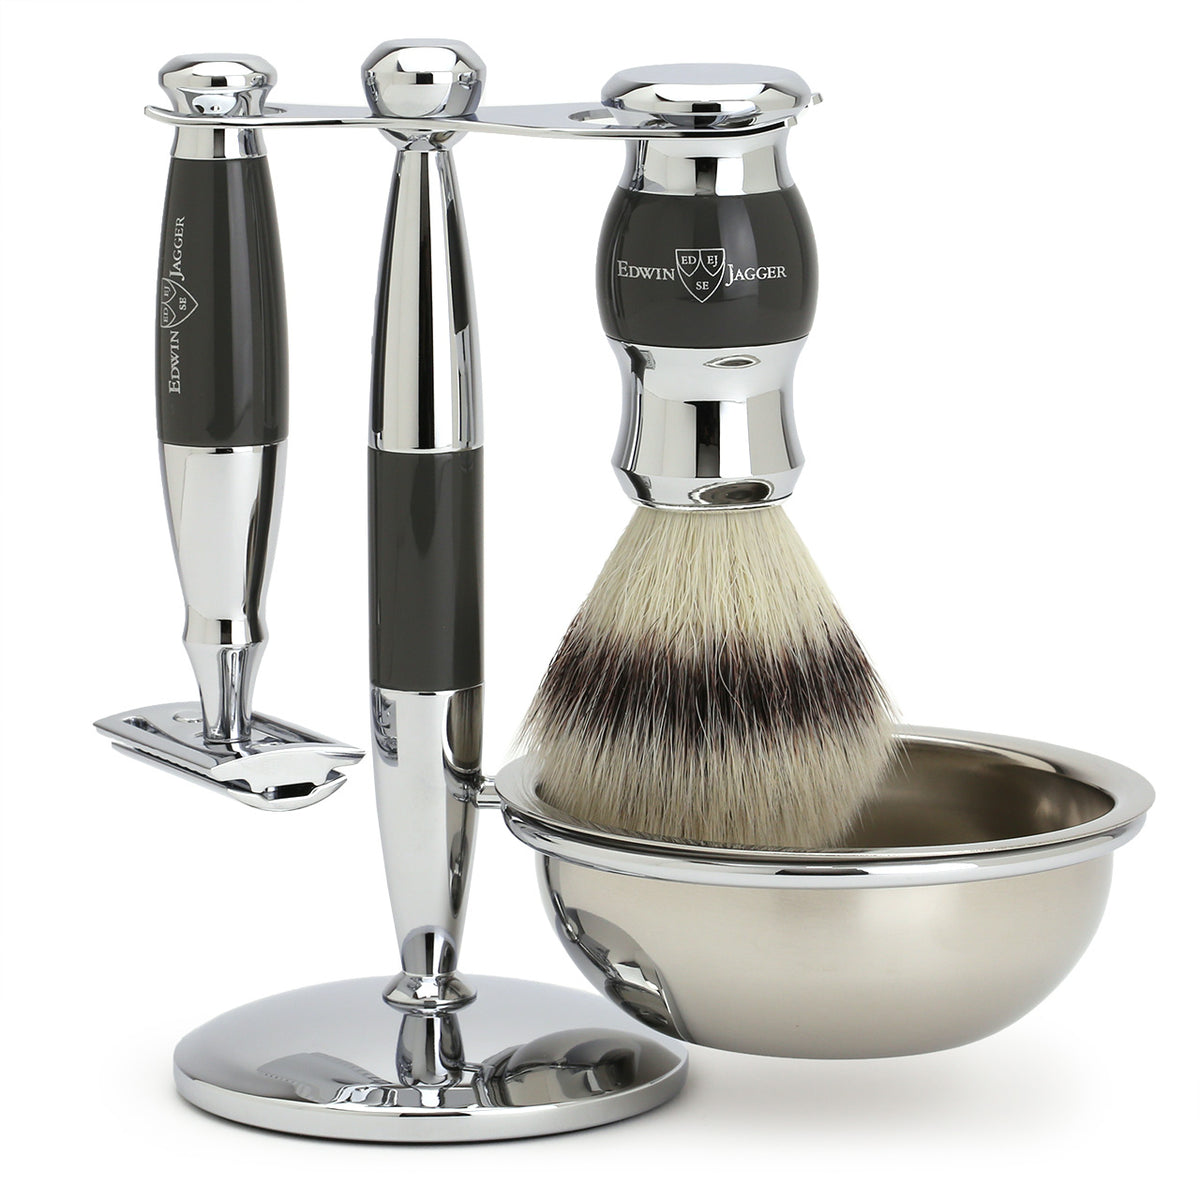 Edwin Jagger Shaving Set with Shaving Brush, Safety Razor, Stand and Soap Bowl - Grey